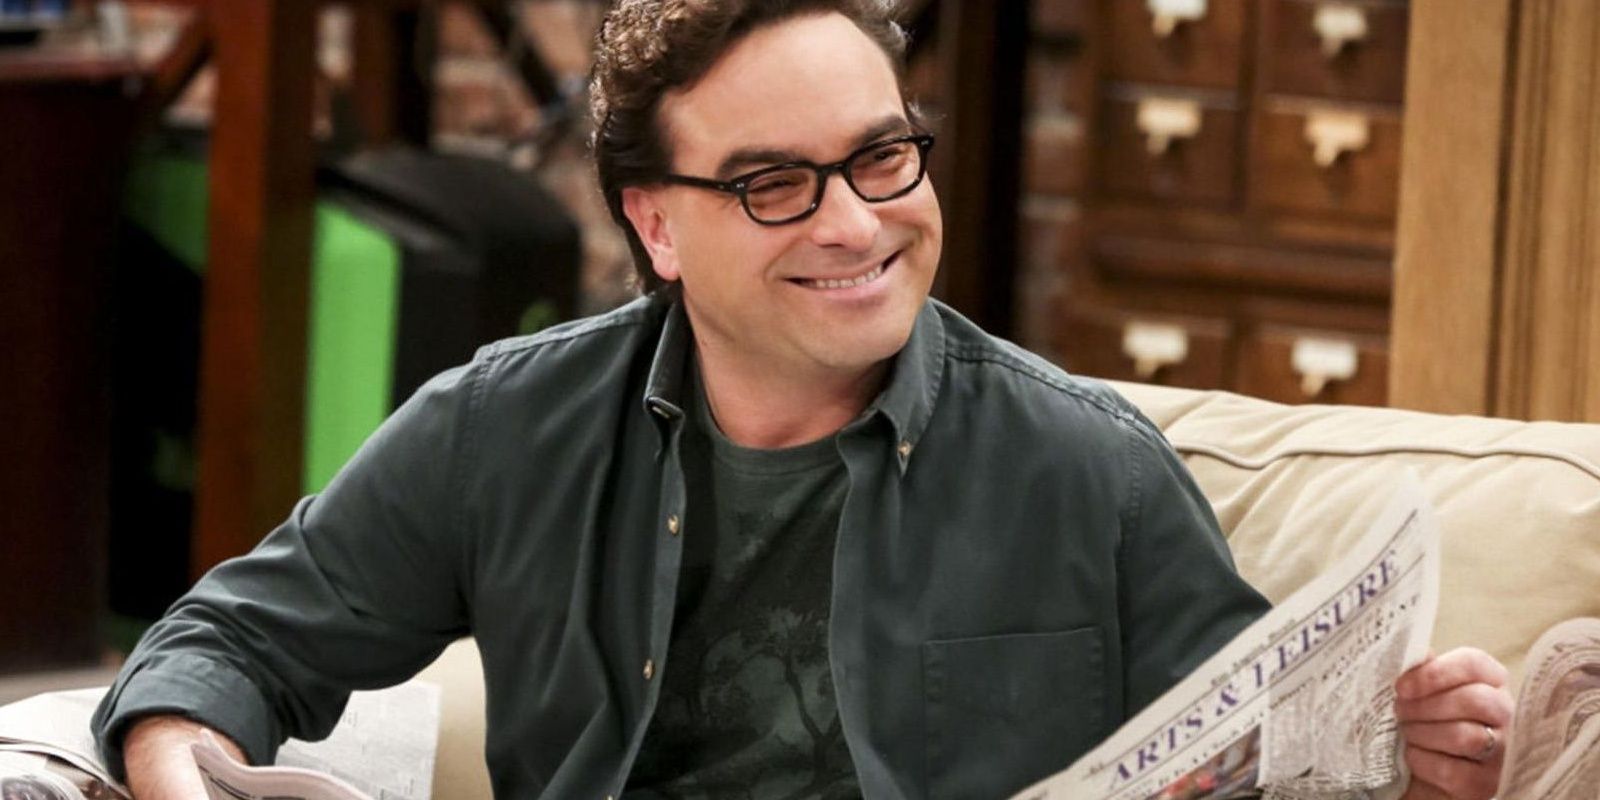 Leonard smiling widely in The Big Bang Theory.